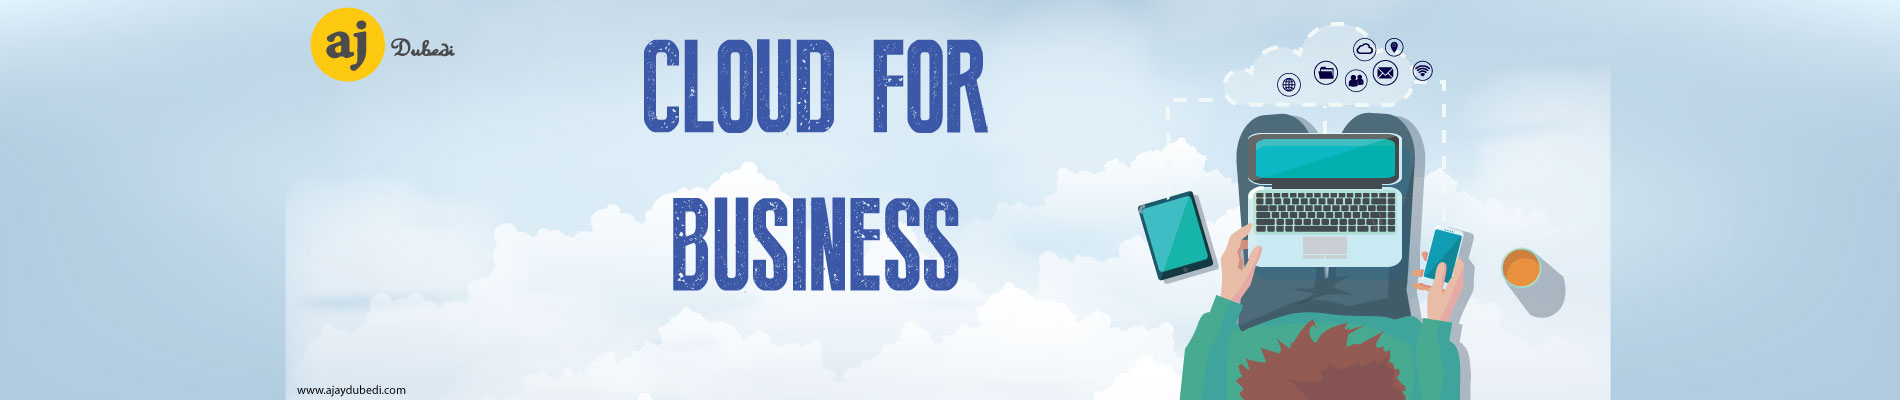 Cloud-for-bussiness